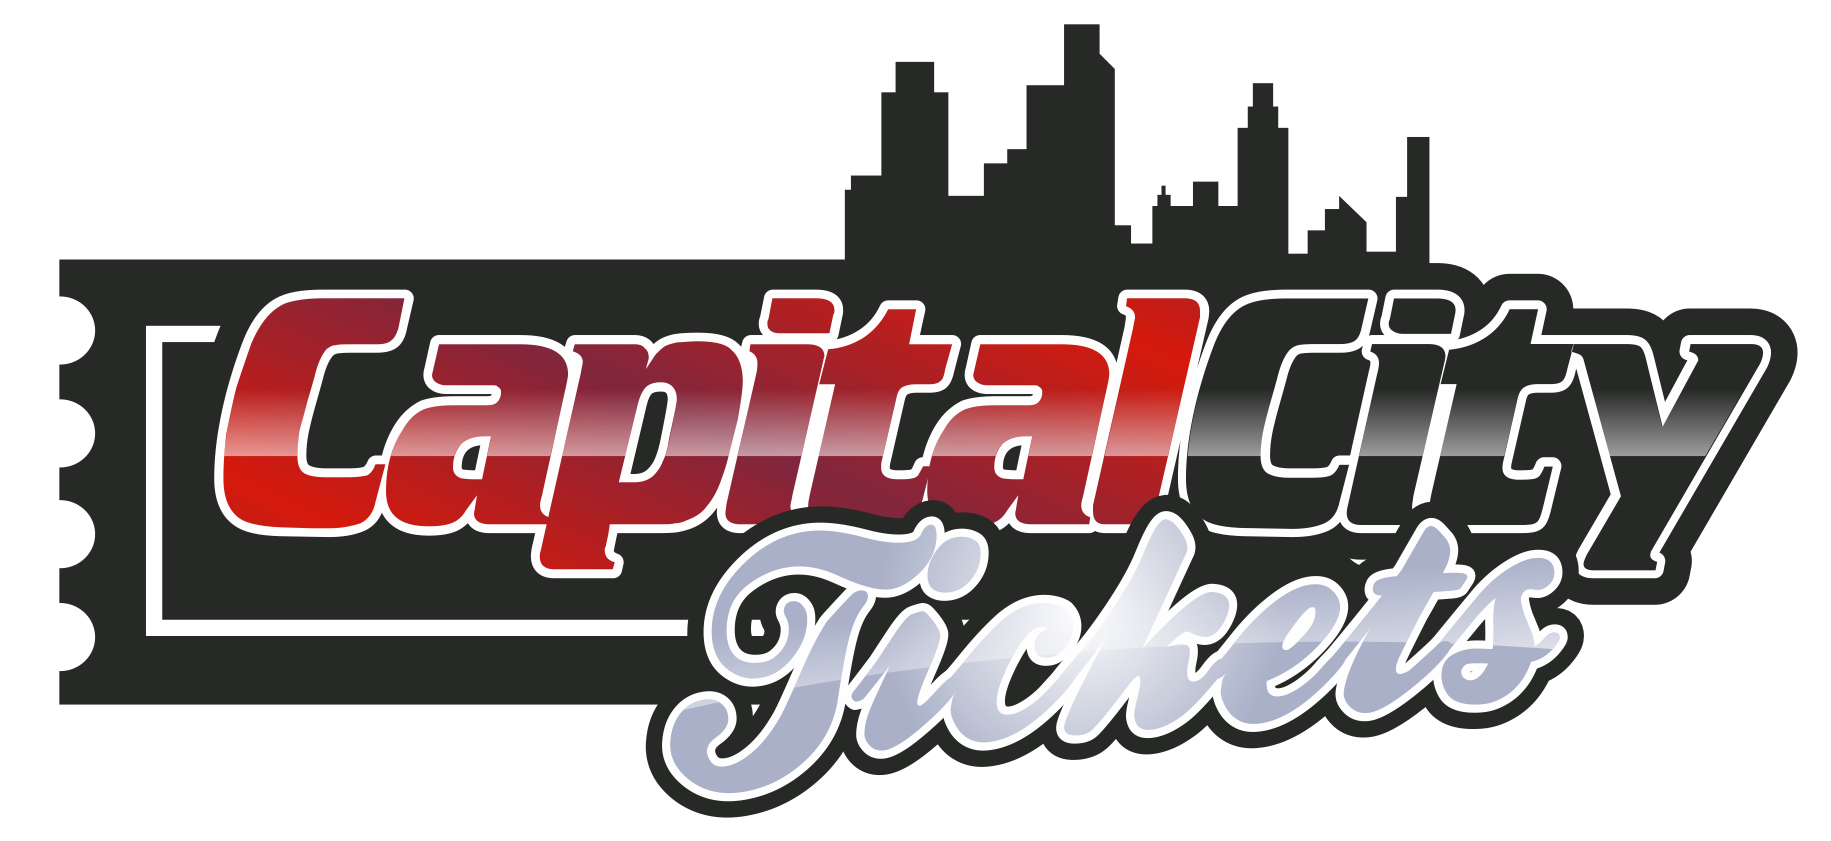 Cheap 2021-22 Washington Capitals Hockey Tickets for Center Ice, Upper, and Club Seating Online with Promo Code at Capital City Tickets - See Schedules, Seating Charts, and Game Dates